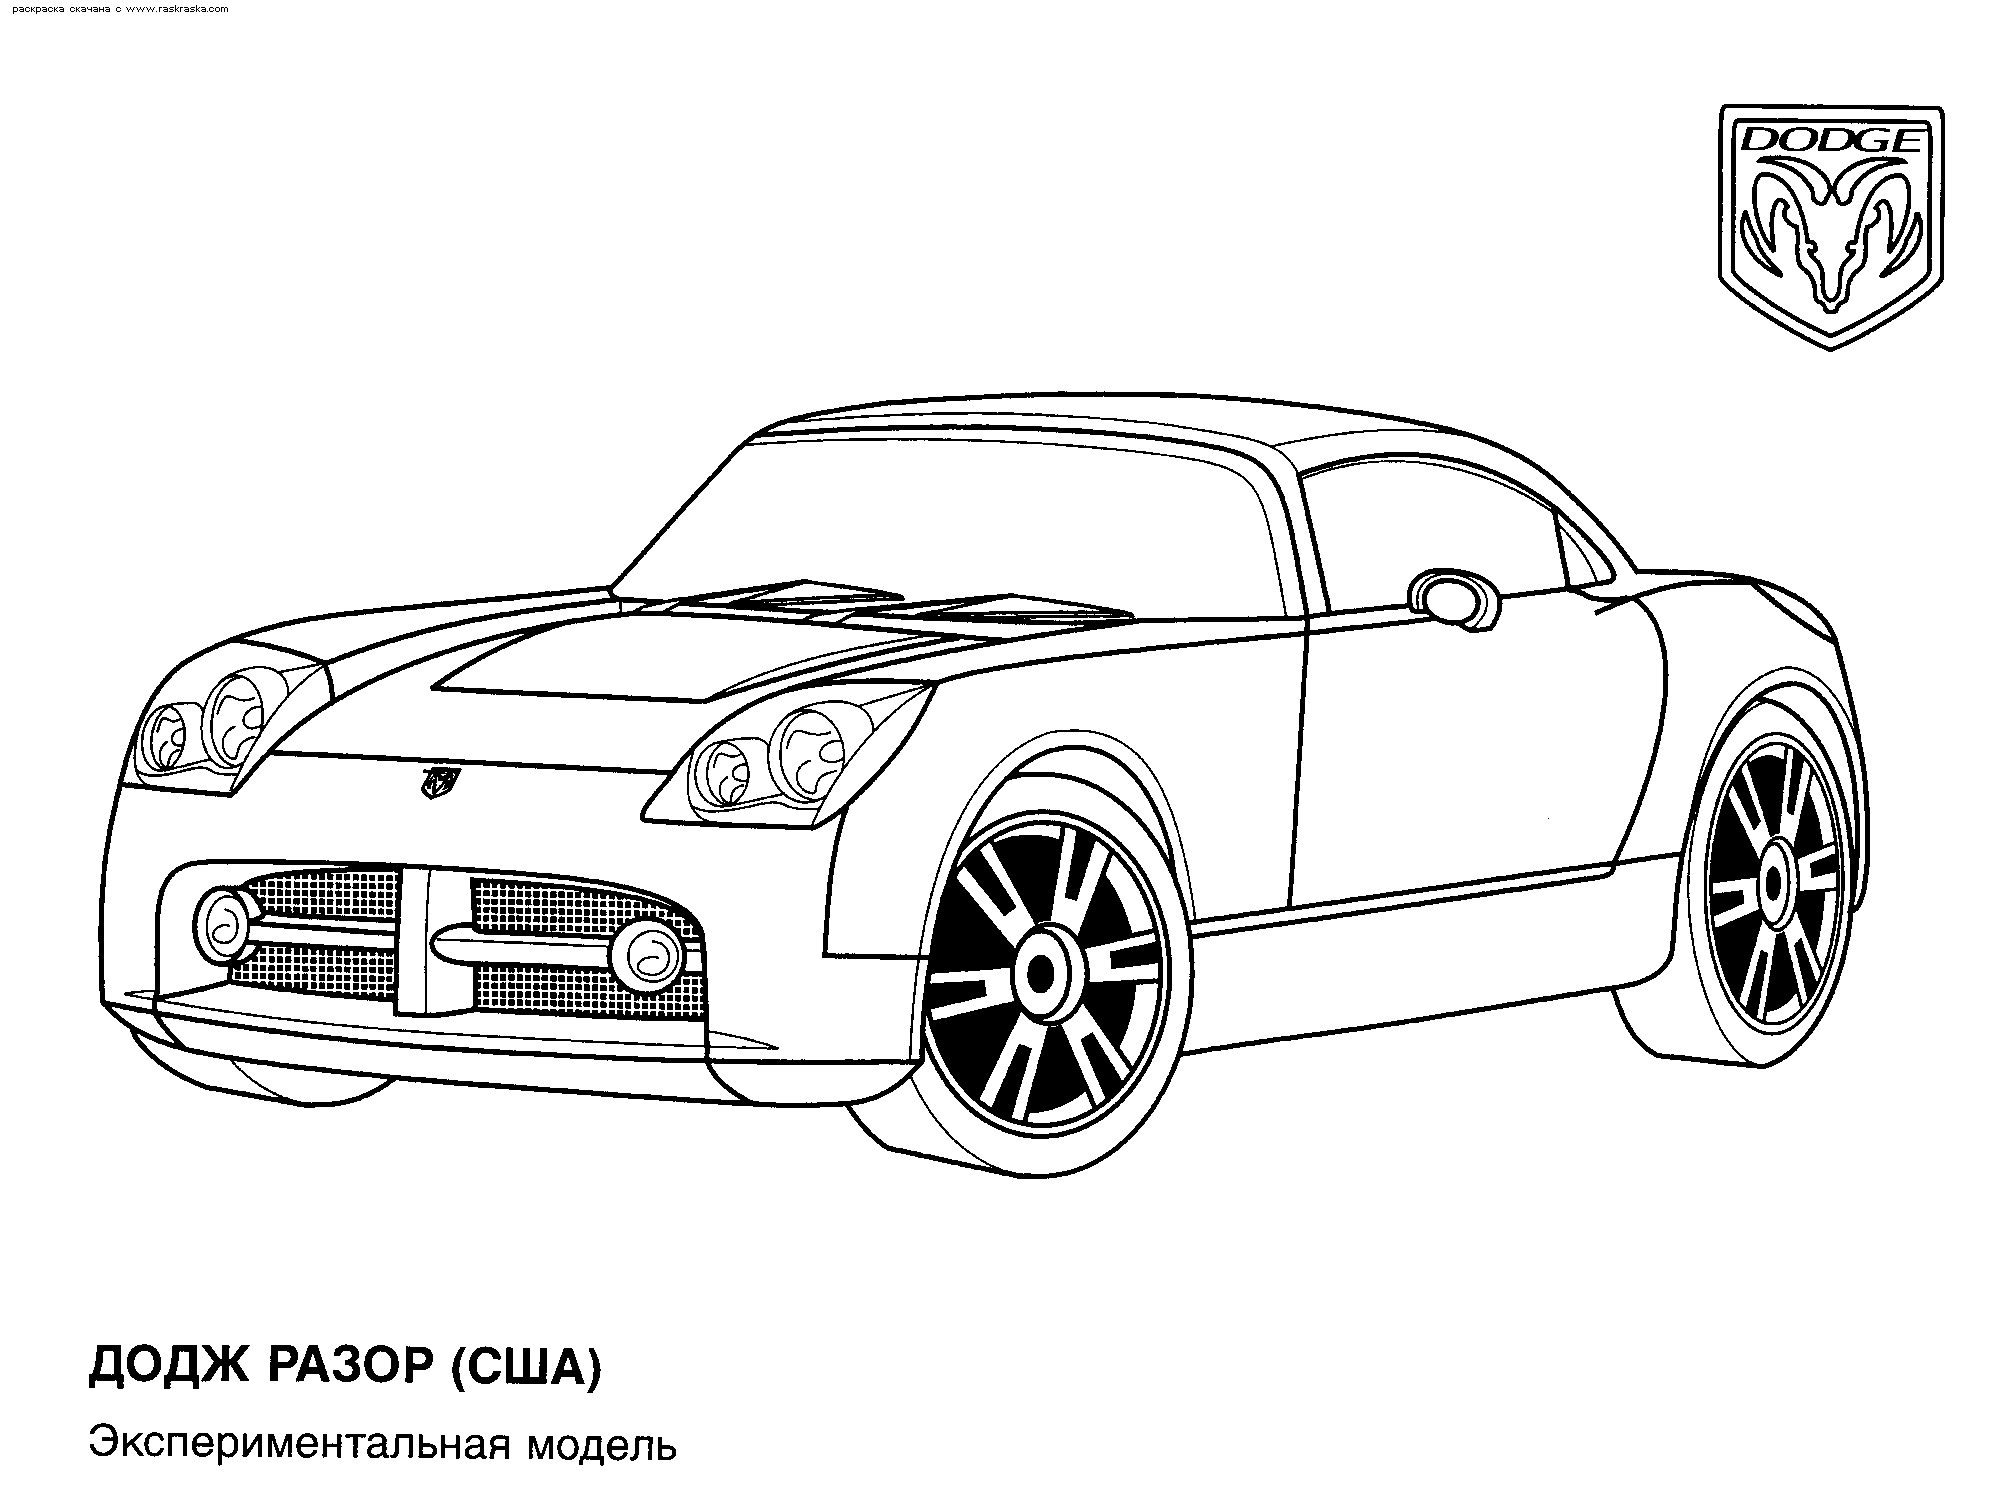 Dodge Car Colouring pages